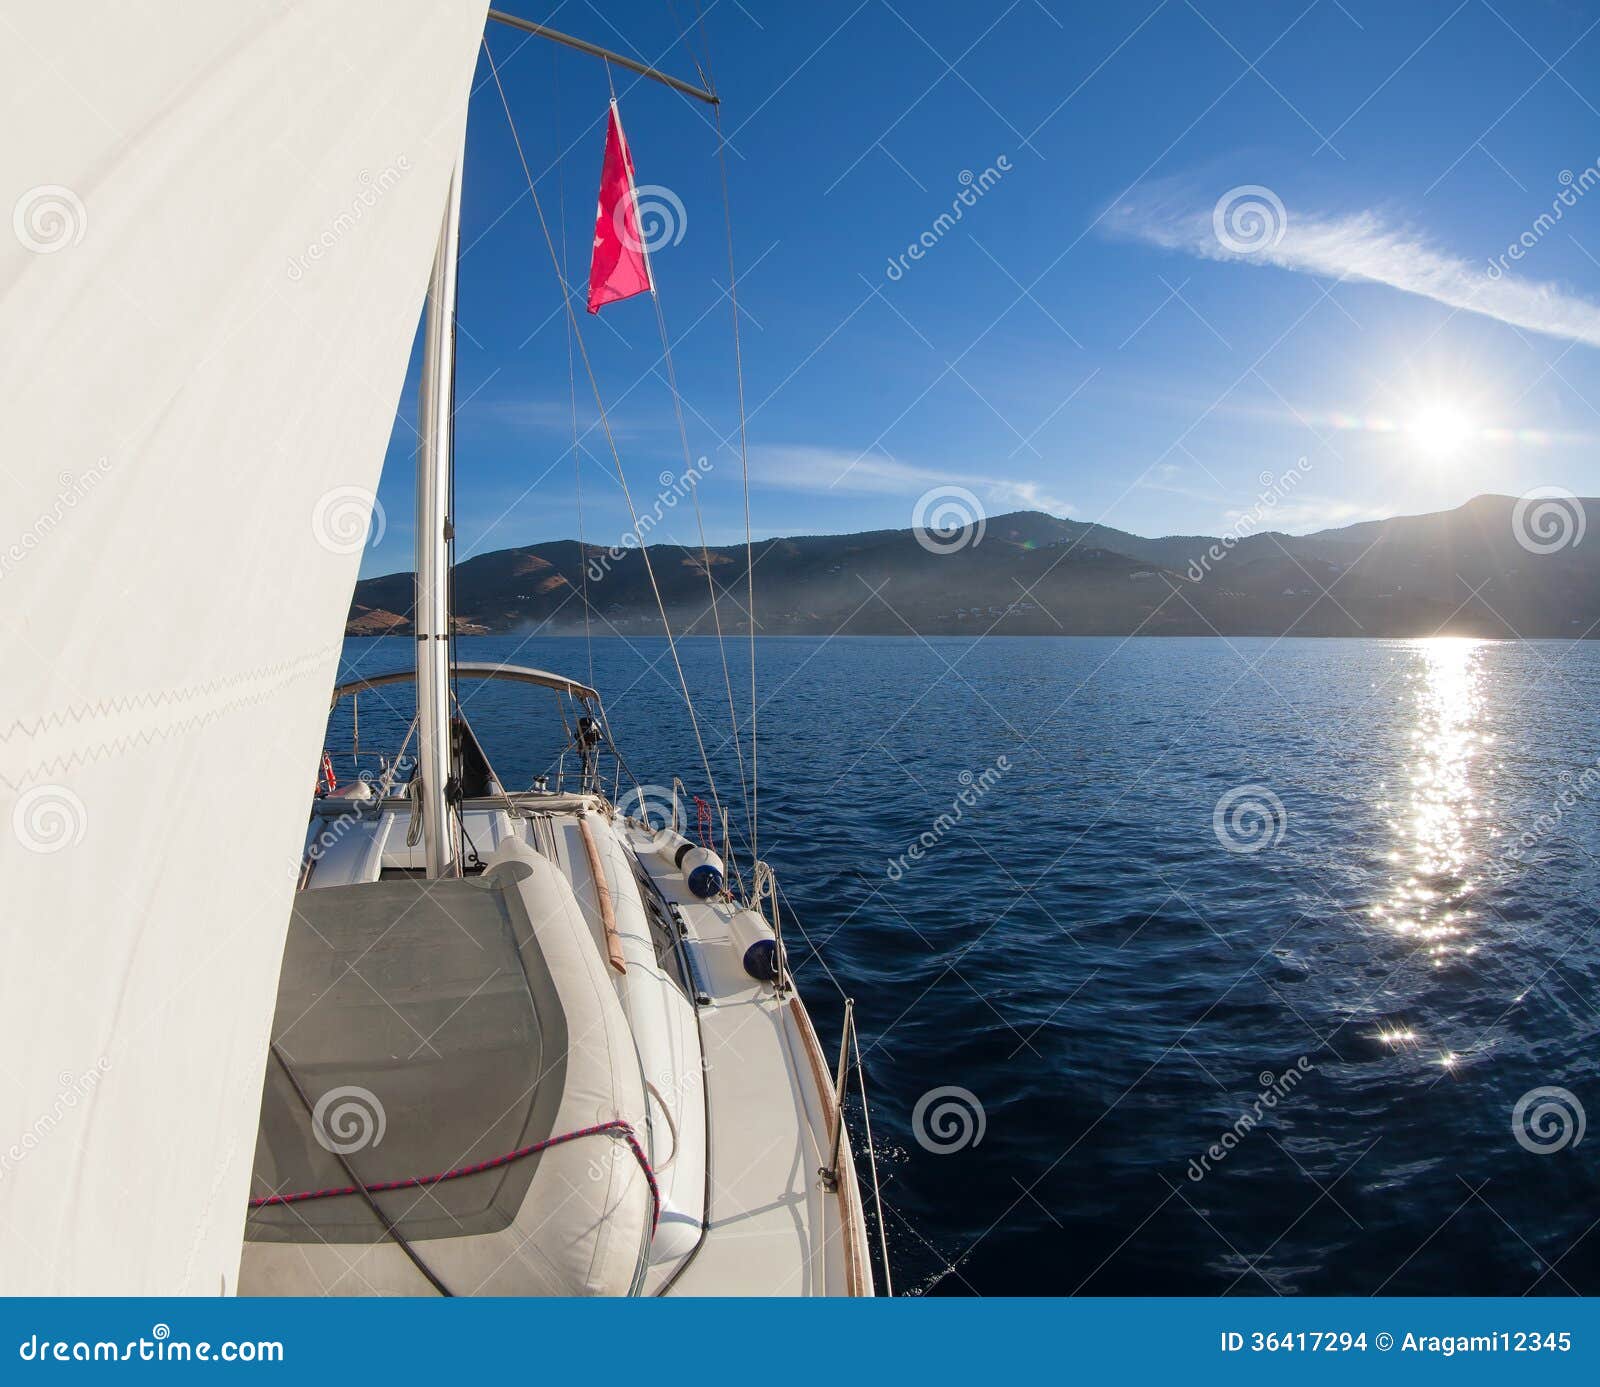 sailing boat front view stock photo. image of ocean